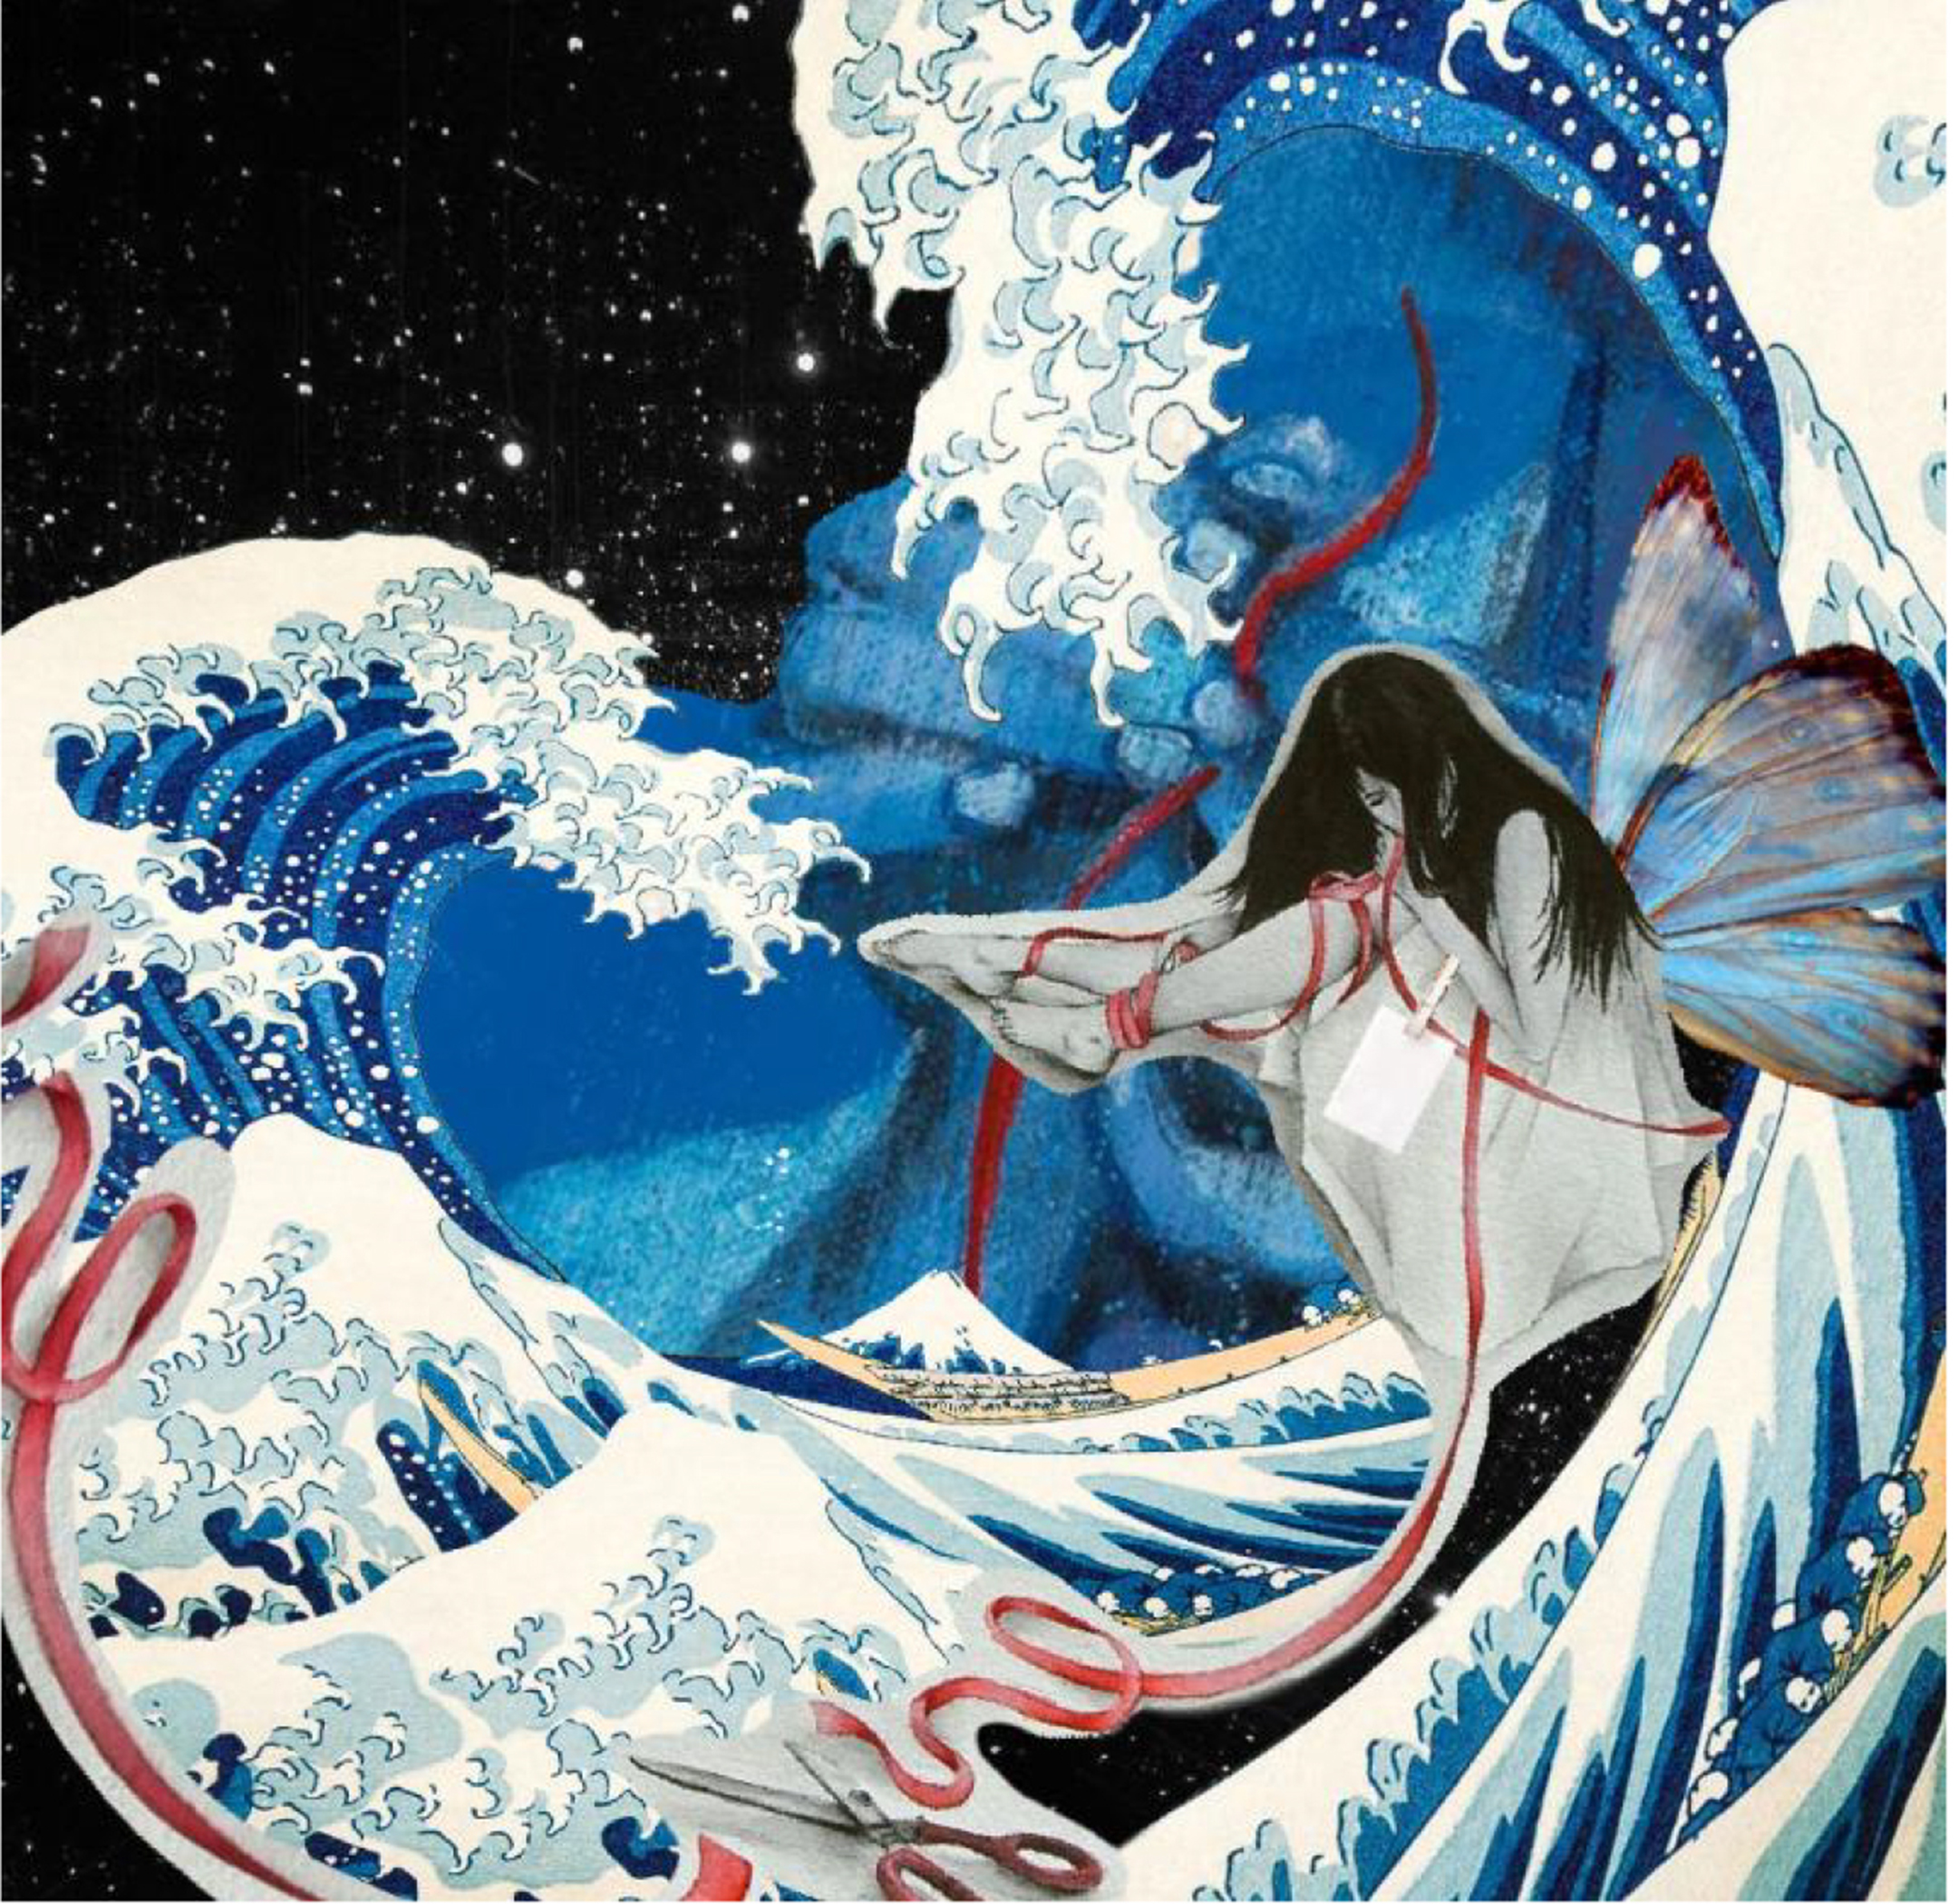 Illustrative collage of a young woman crouching in large blue waves